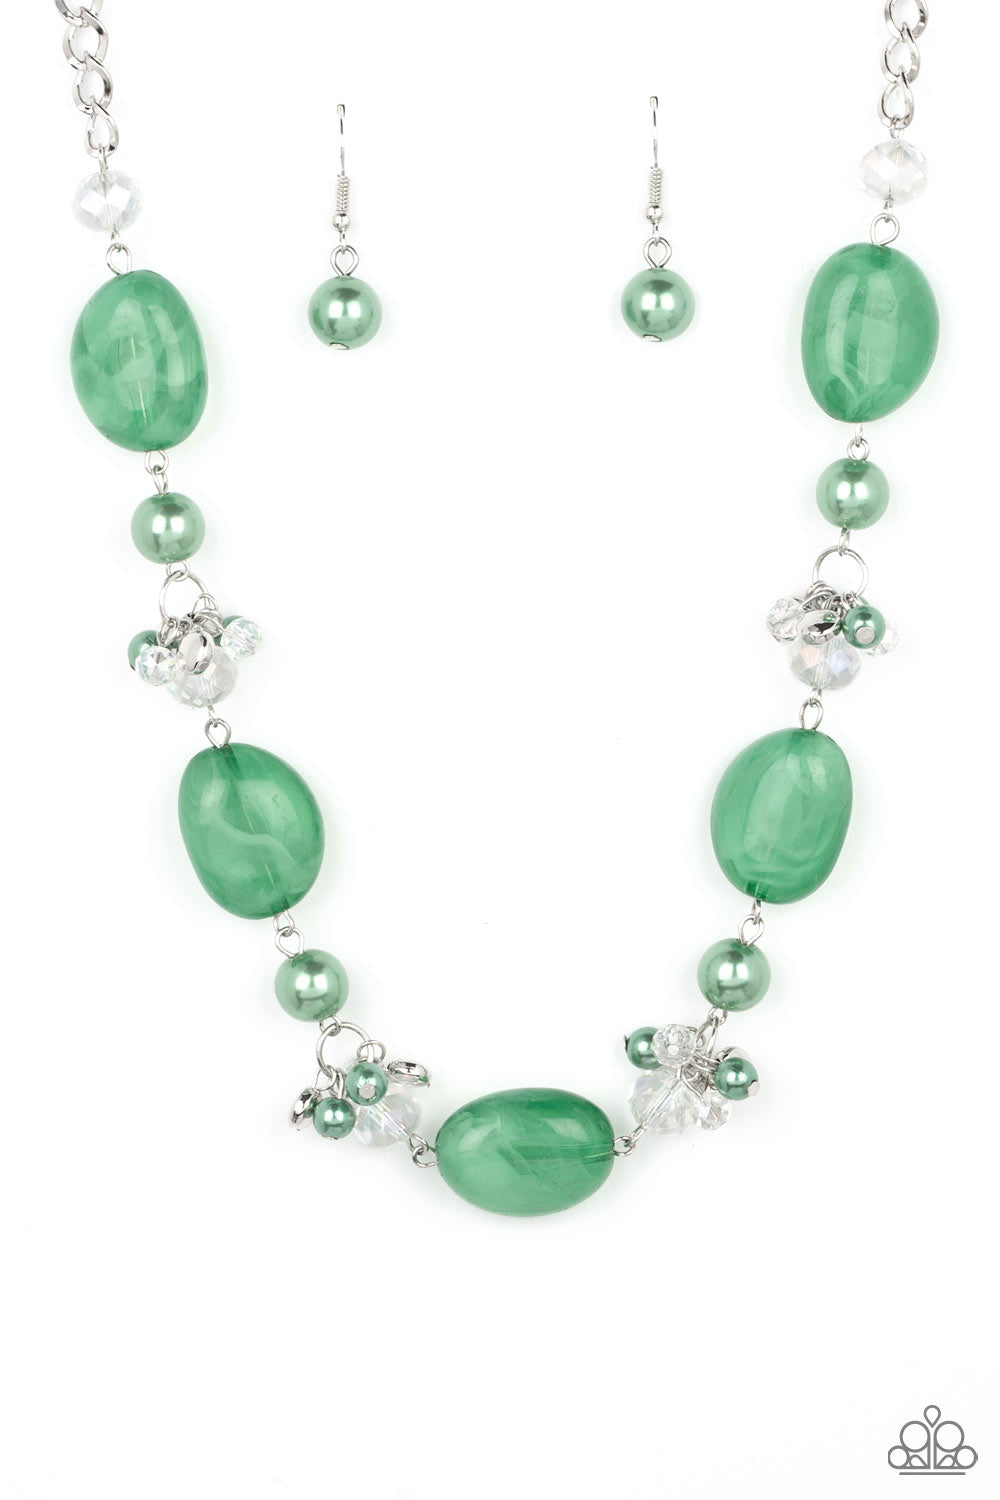 The Top TENACIOUS - Green Bead Necklace - Paparazzi Accessories